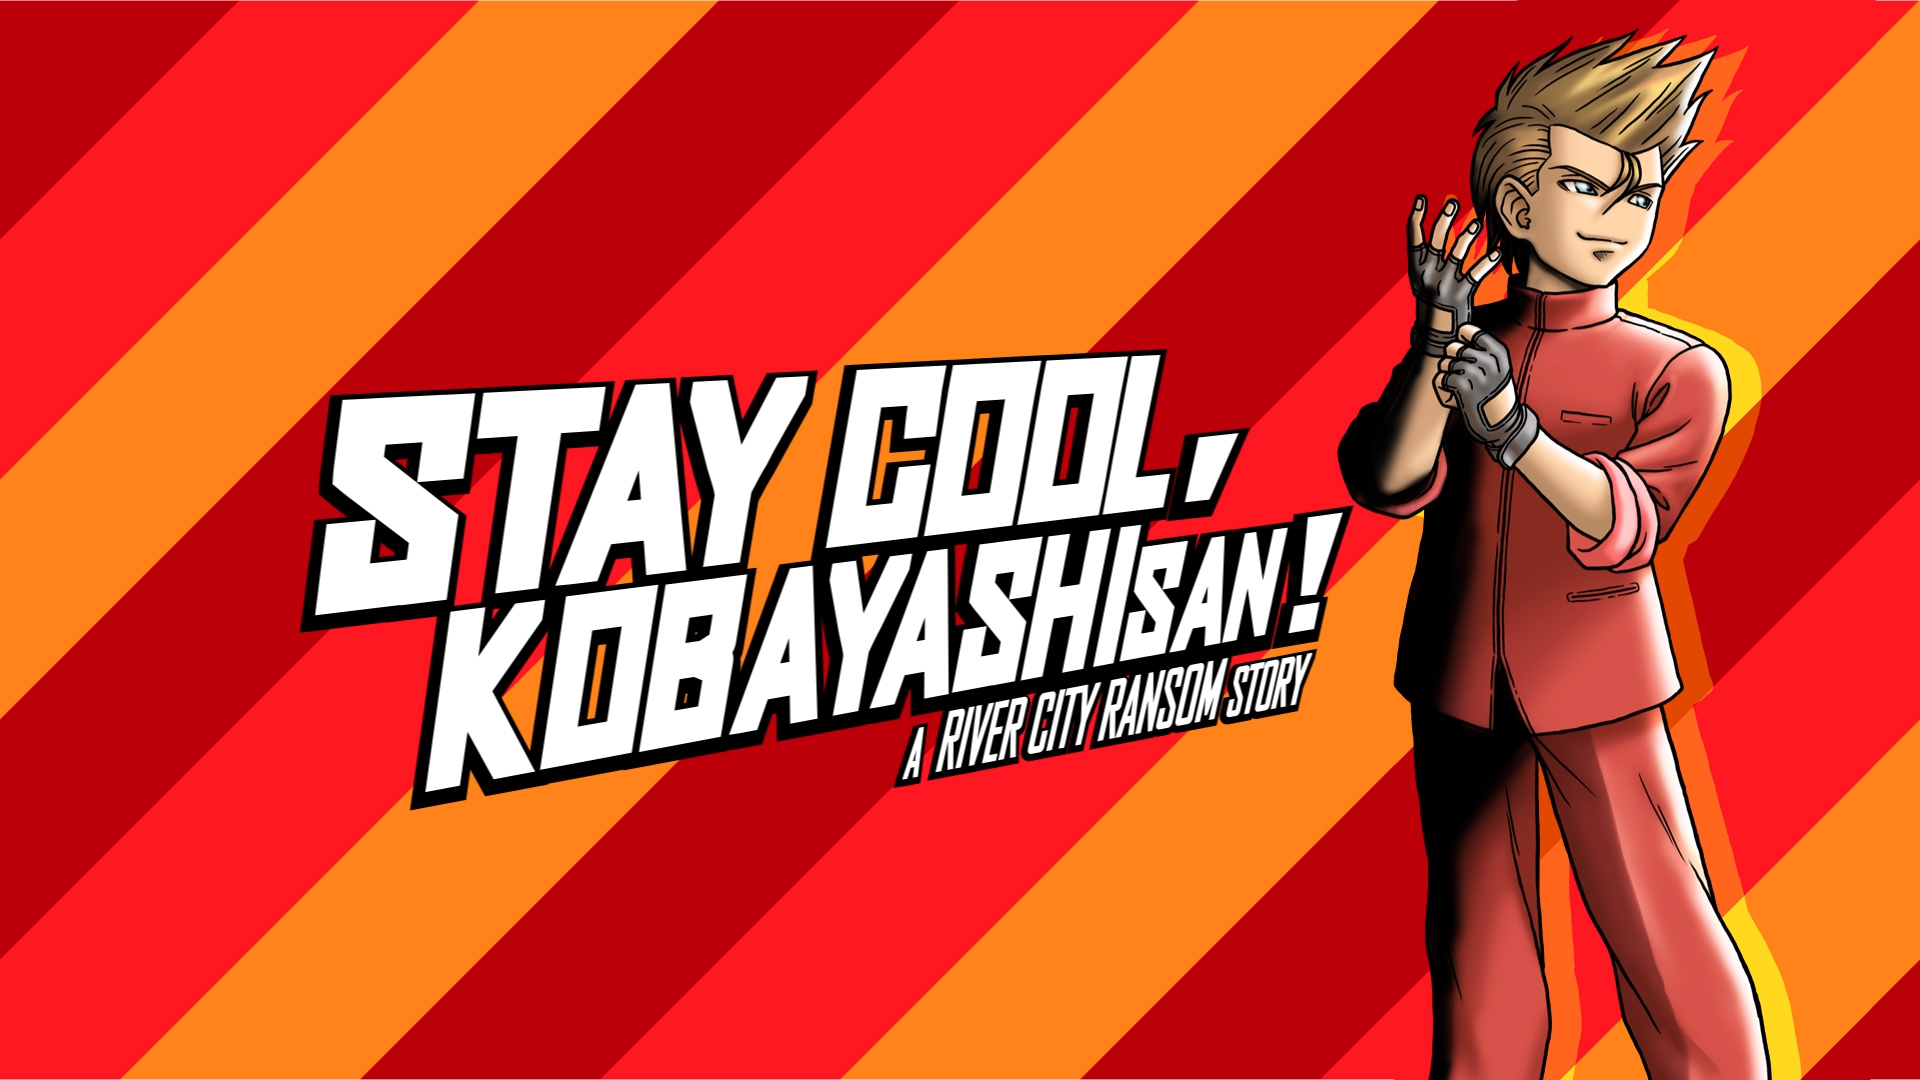 Stay Cool, Kobayashi-San!: A River City Ransom Story fights its way to PlayStation 4, Nintendo Switch, Xbox One, and Steam(PC)